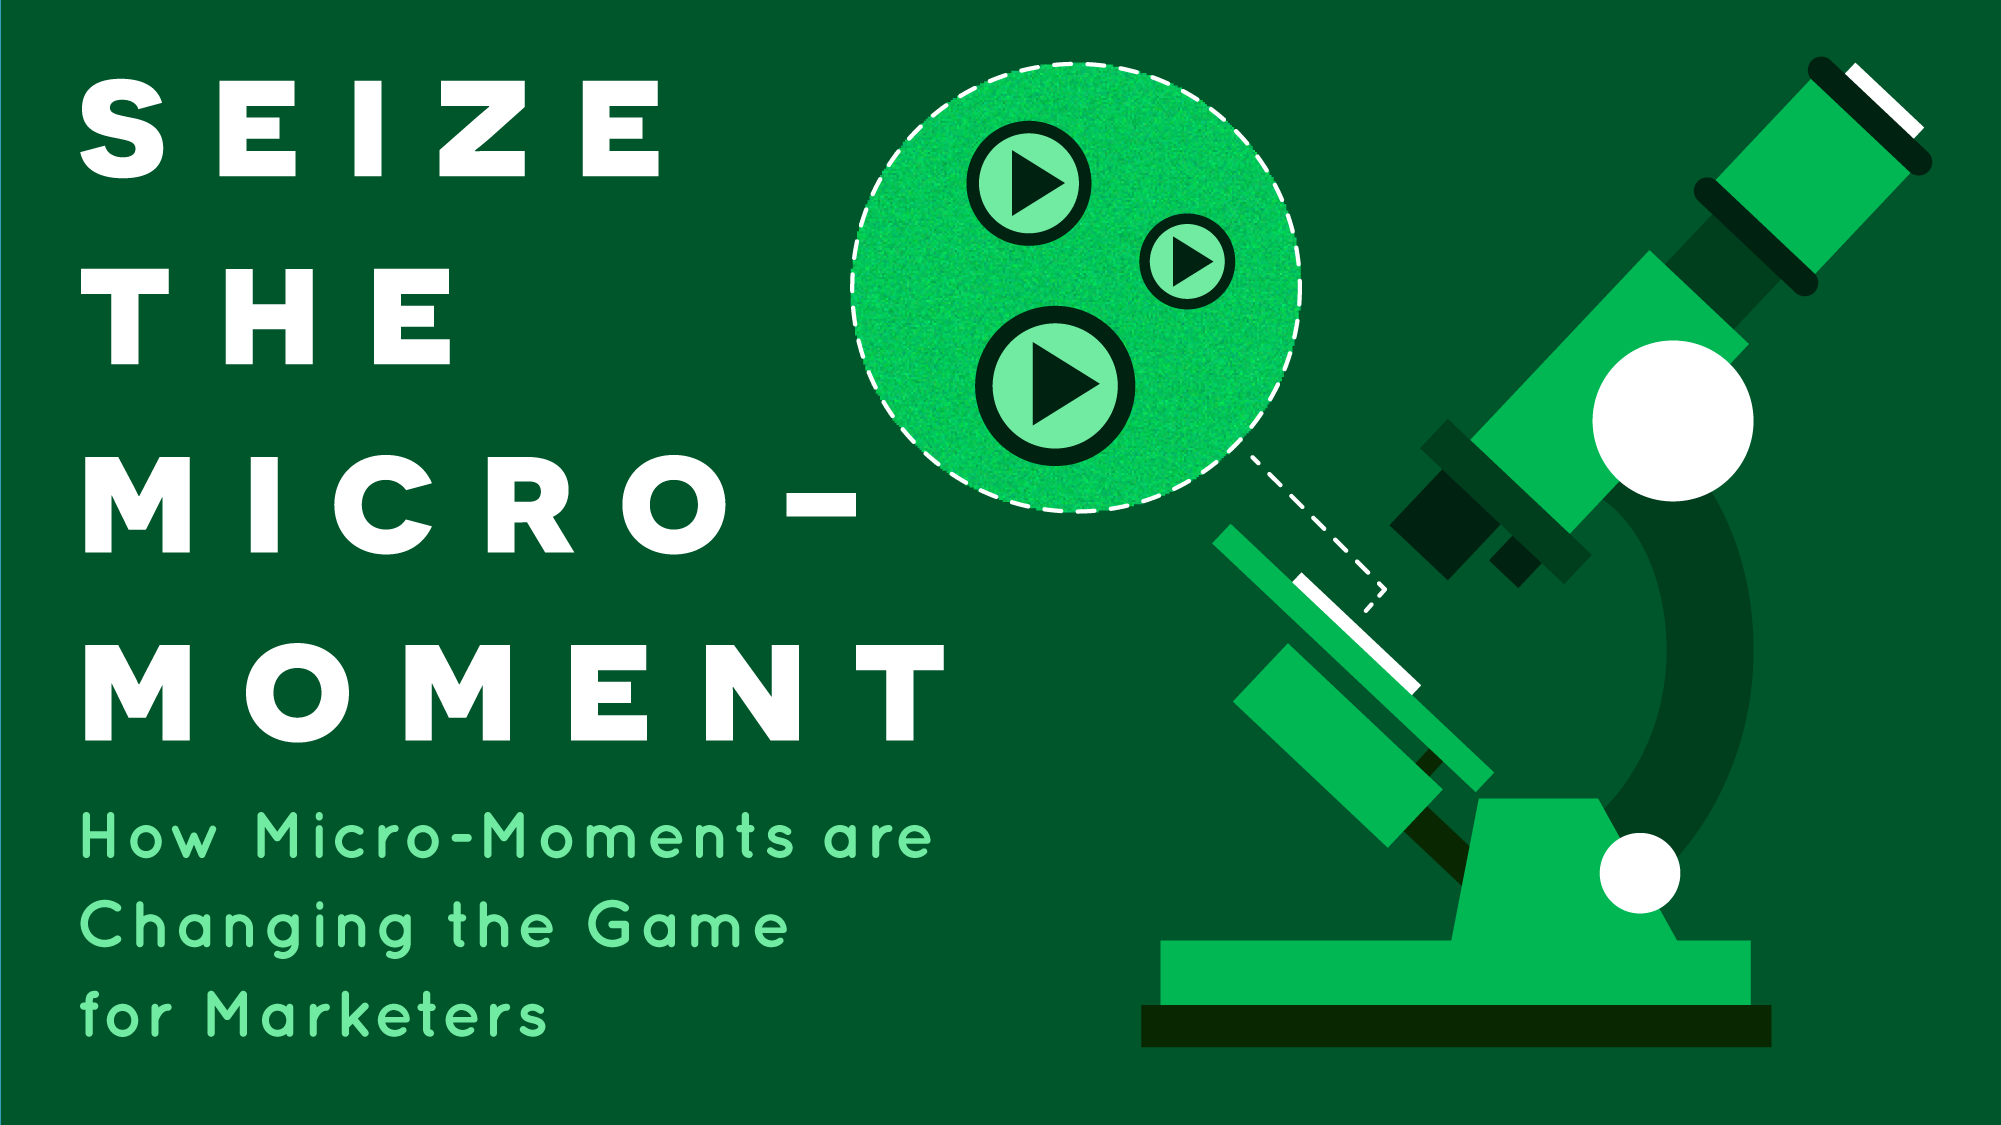 Seize the Micro-Moment: How Micro-Moments are Changing the Game for Marketers